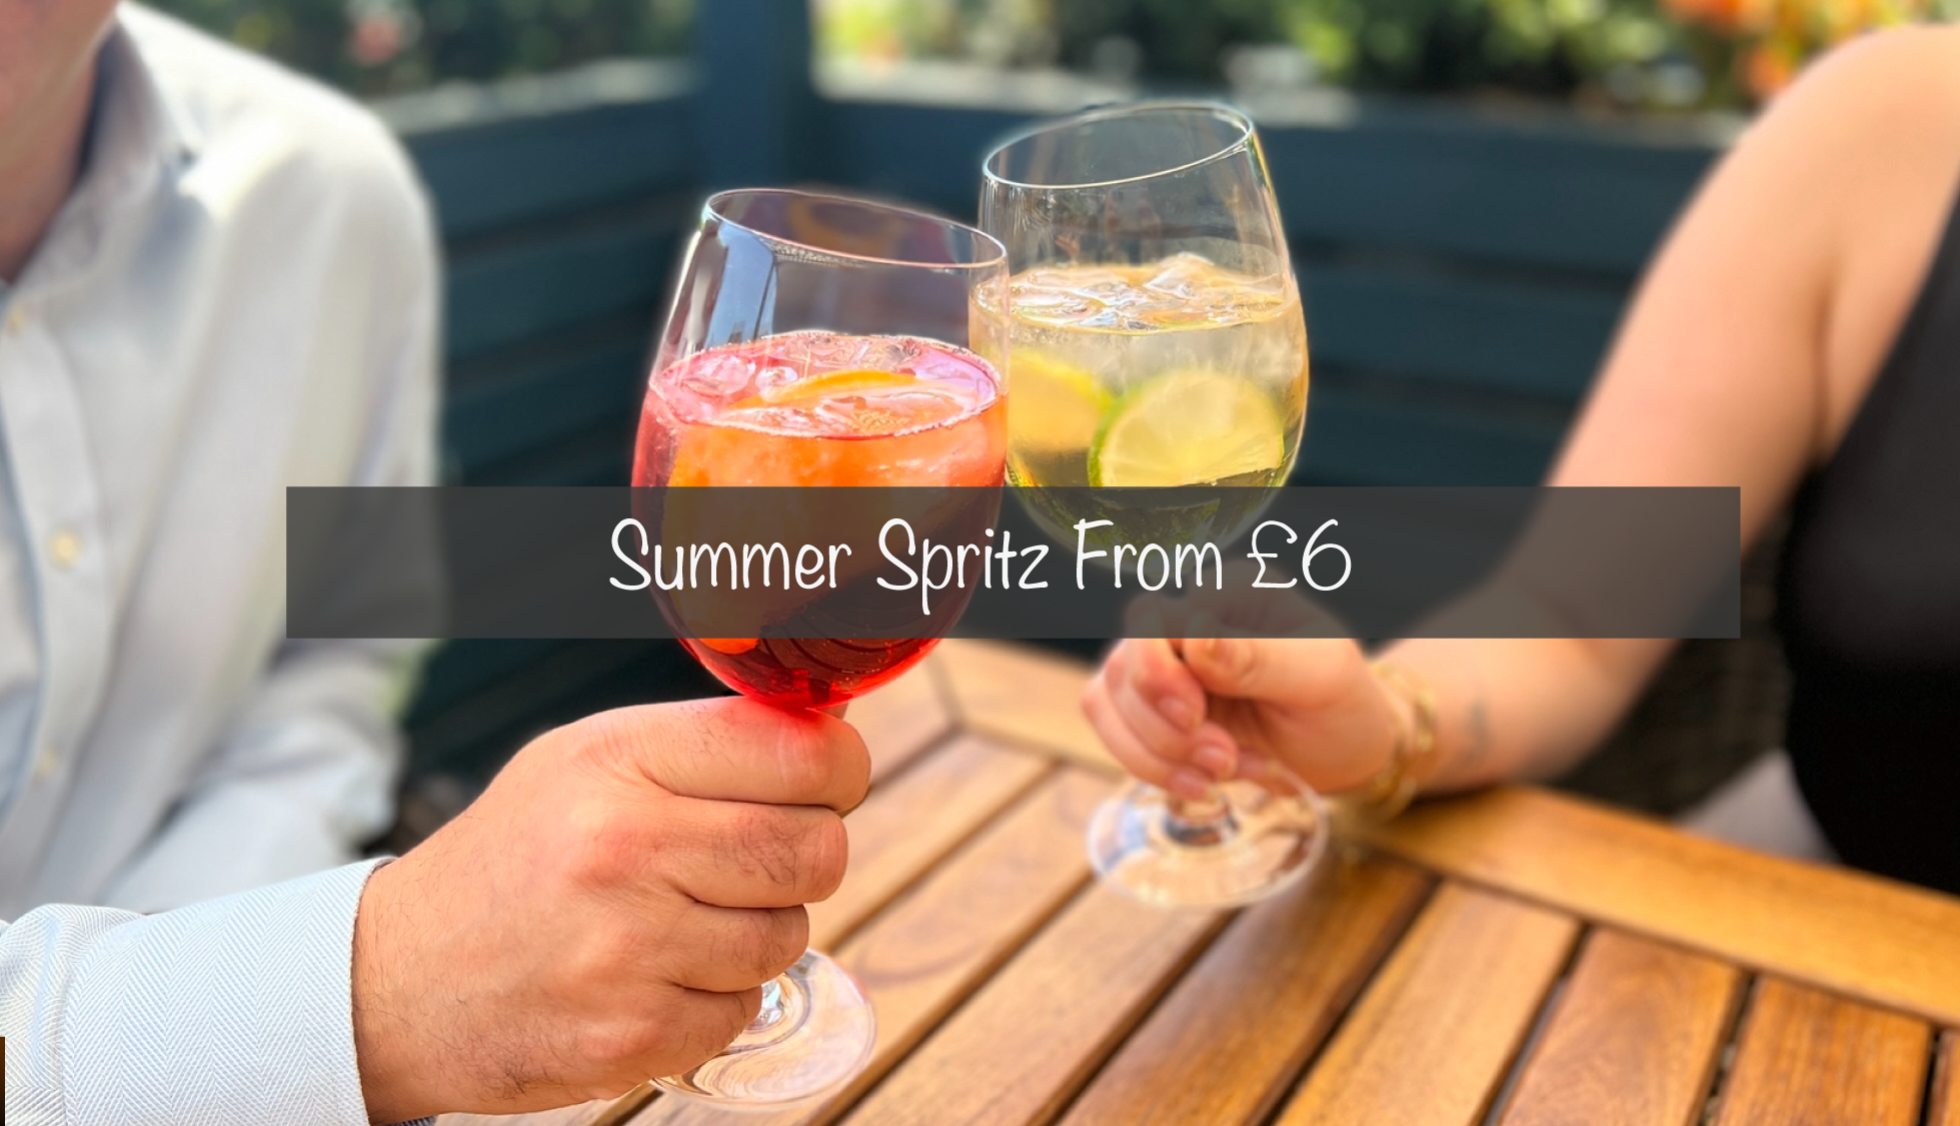 Spritz from £6 cocktail offer at the George